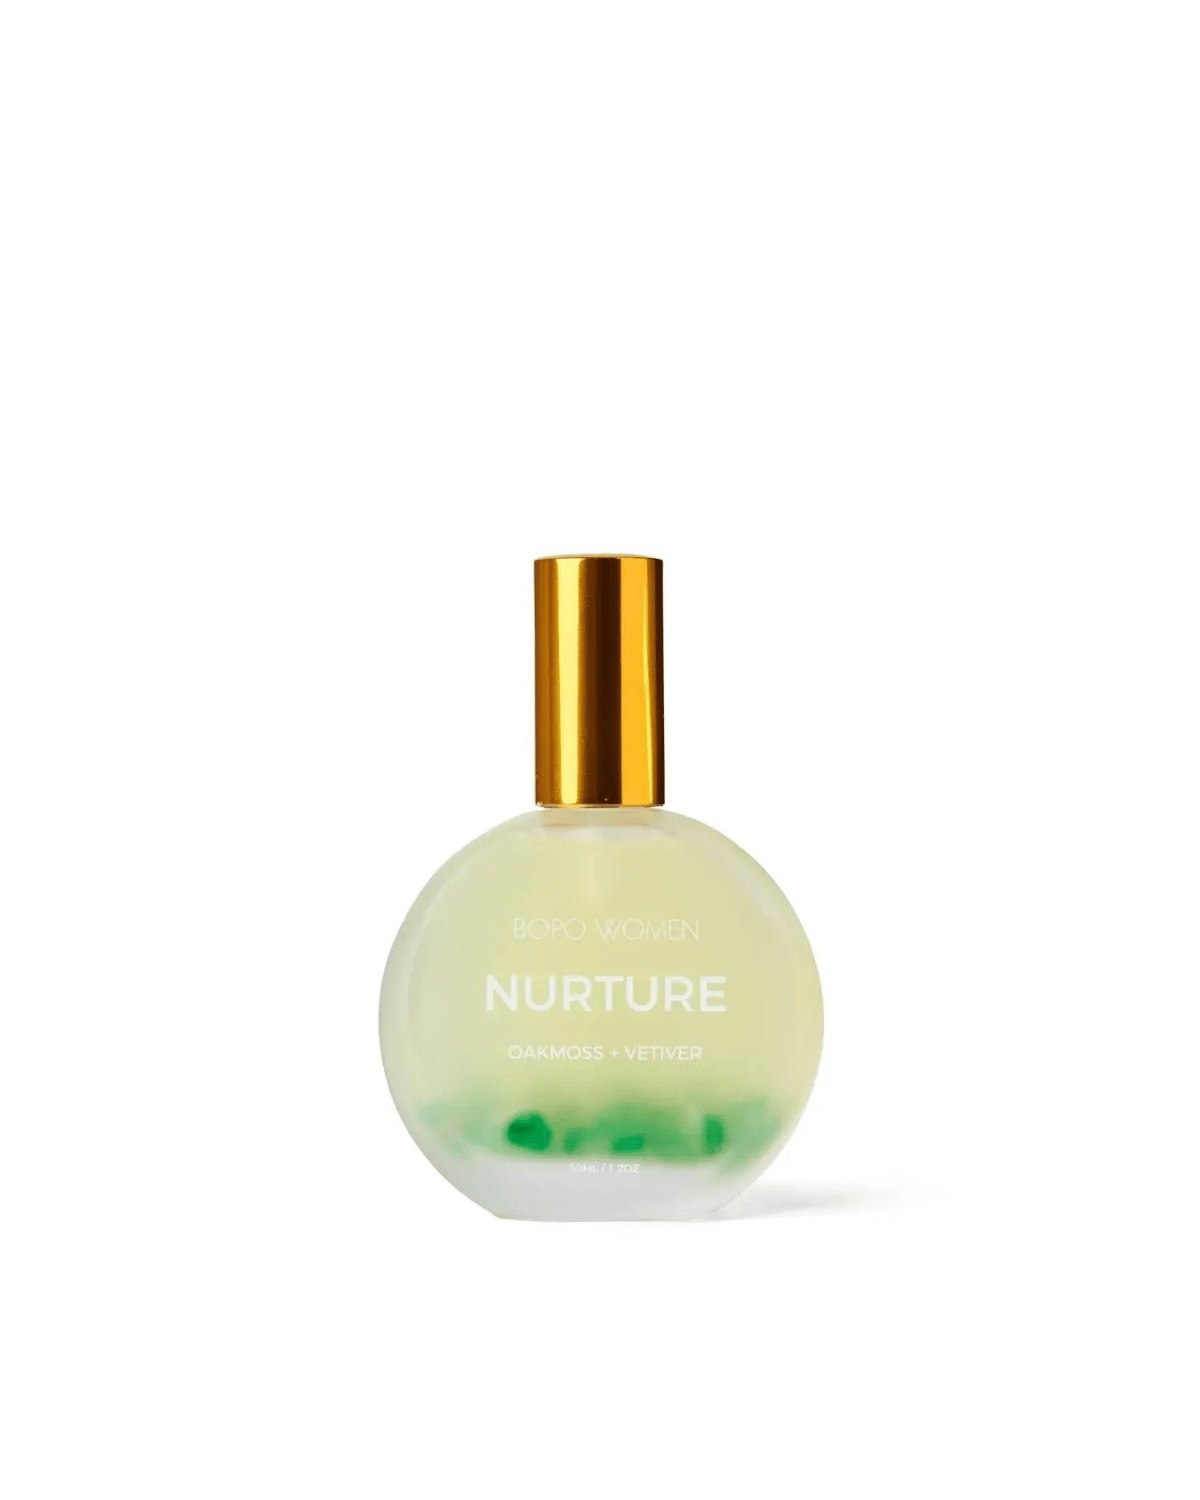 Crystal Infused Zodiac Natural Perfume - Nurture by Bopo Women